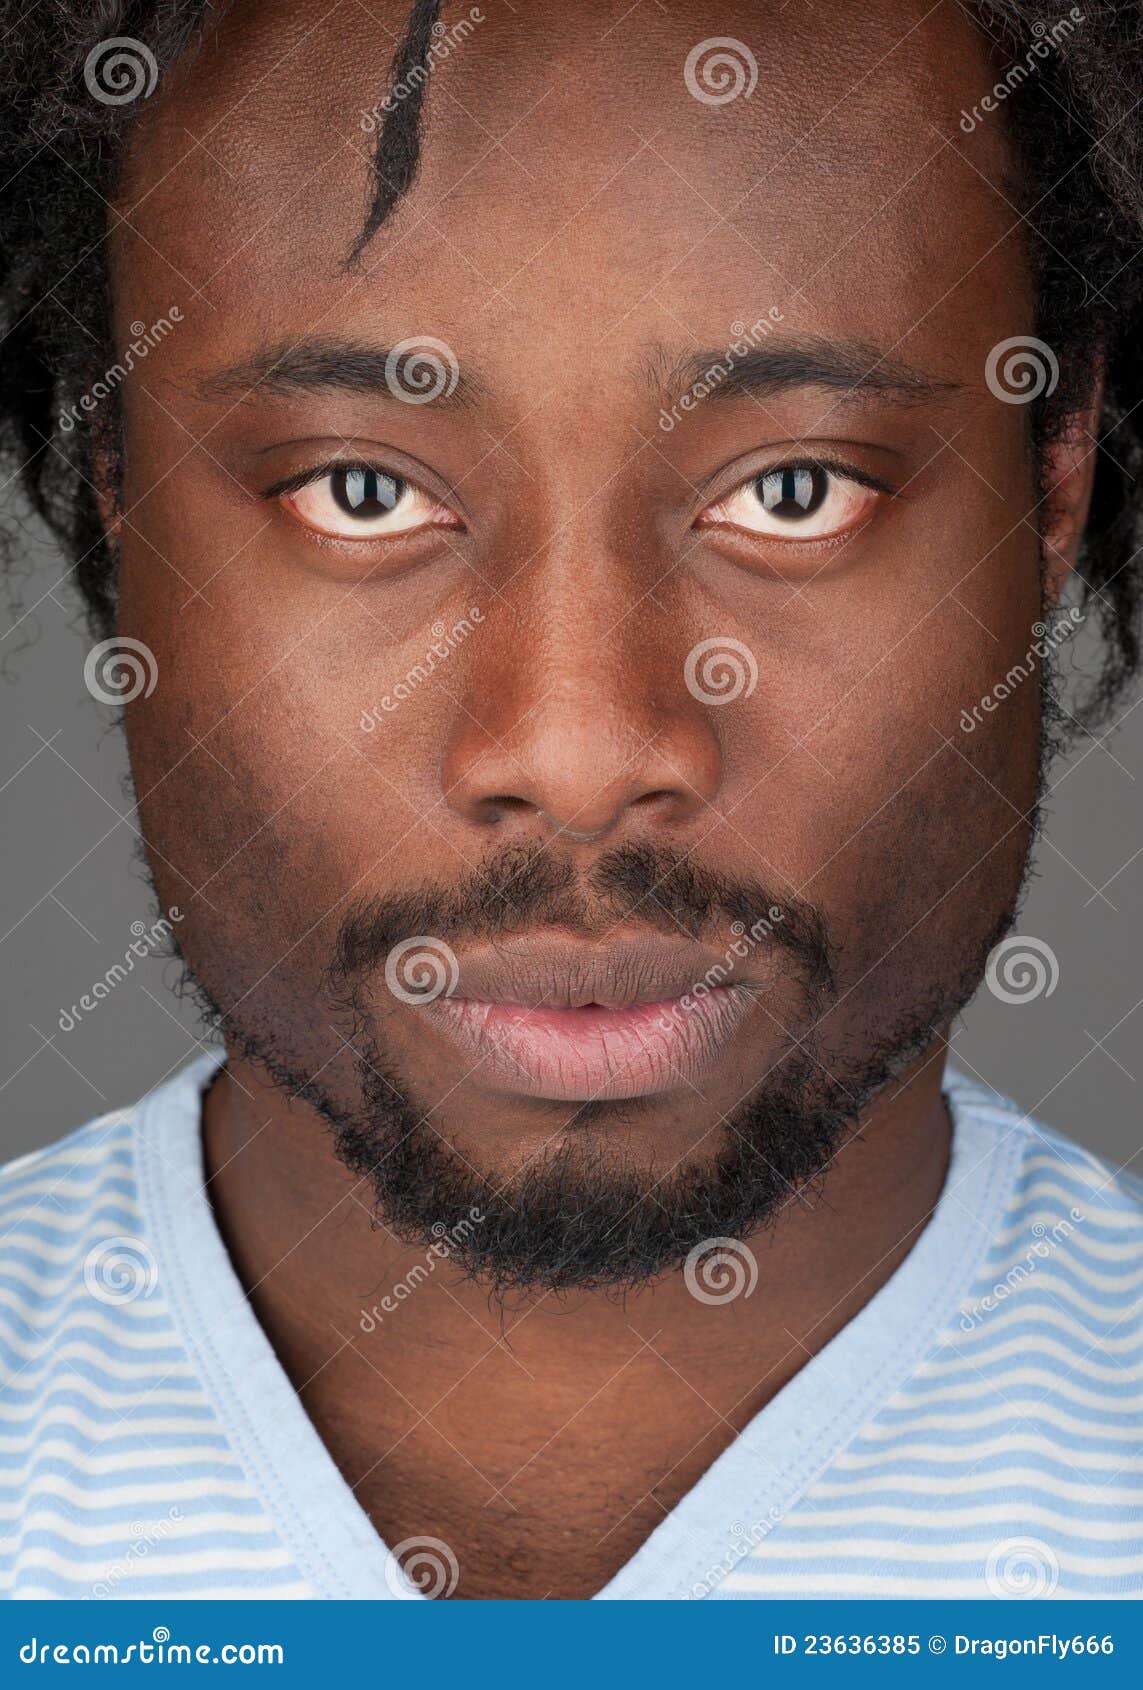 African American Cute Black Young Man Portrait Stock Photo 